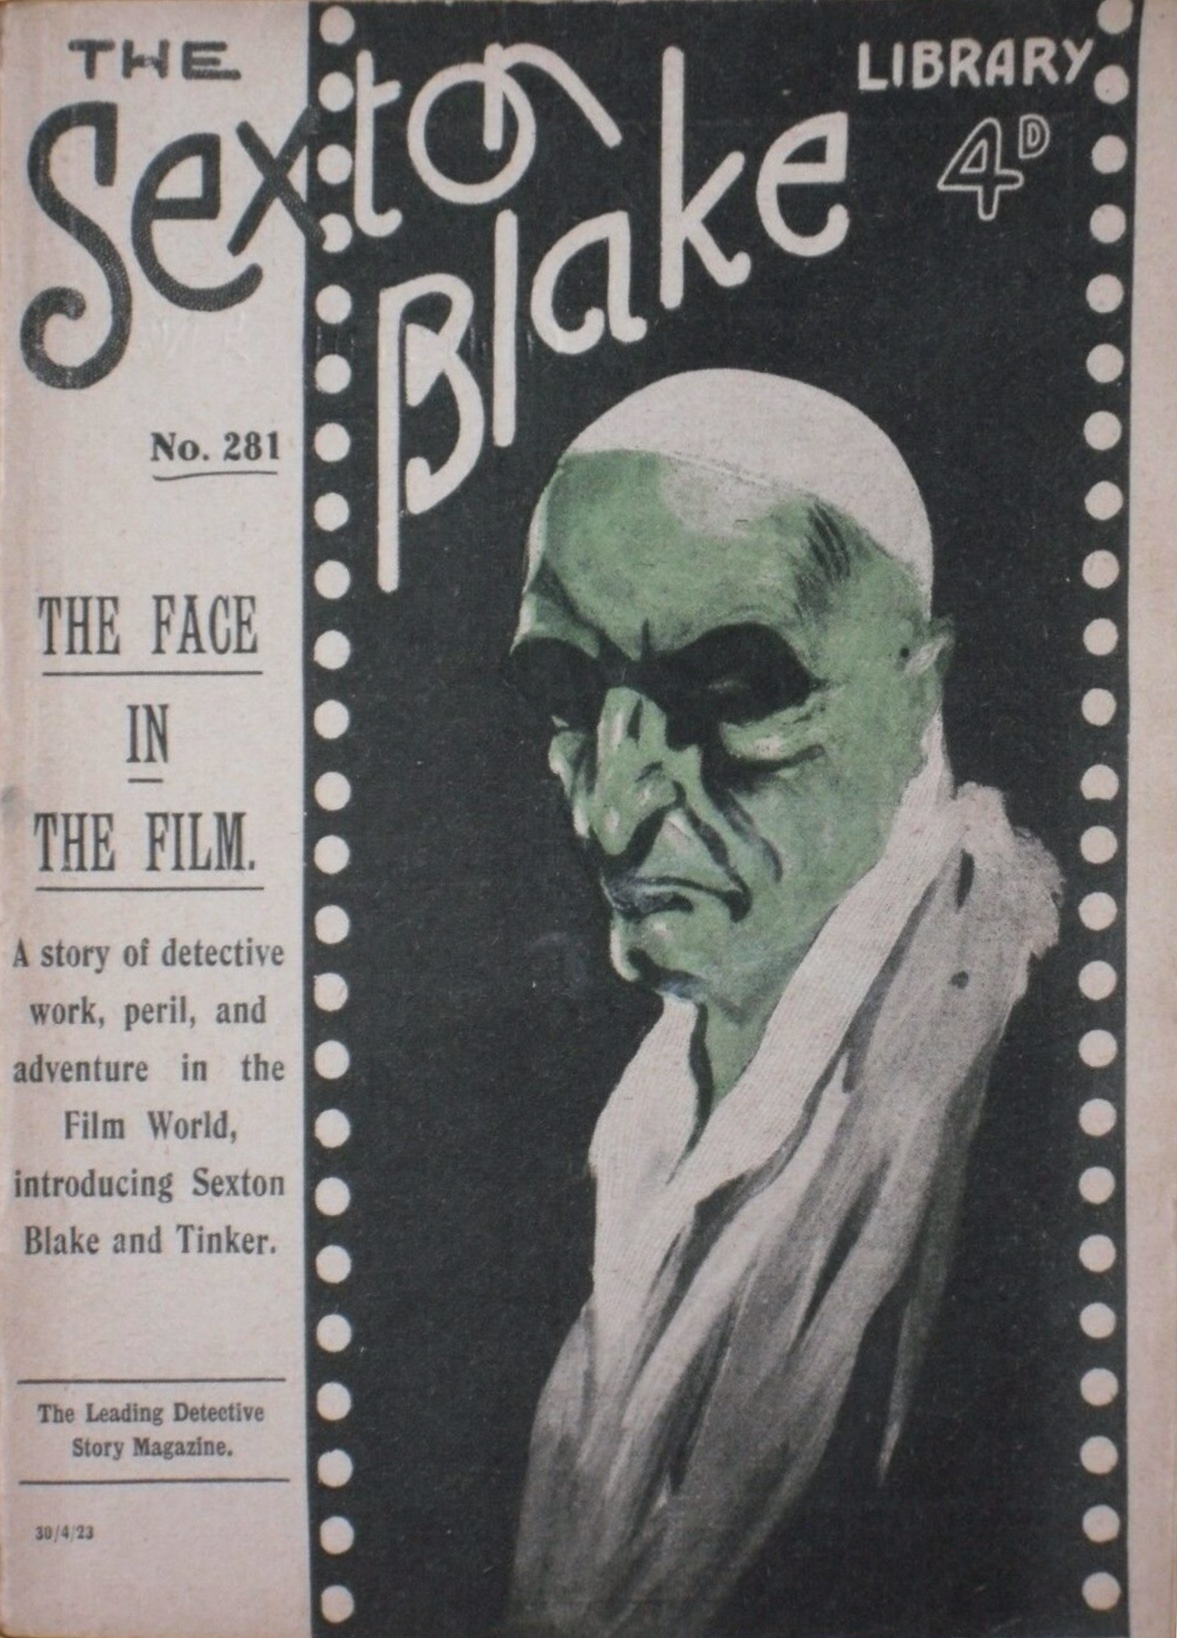 THE FACE IN THE FILM